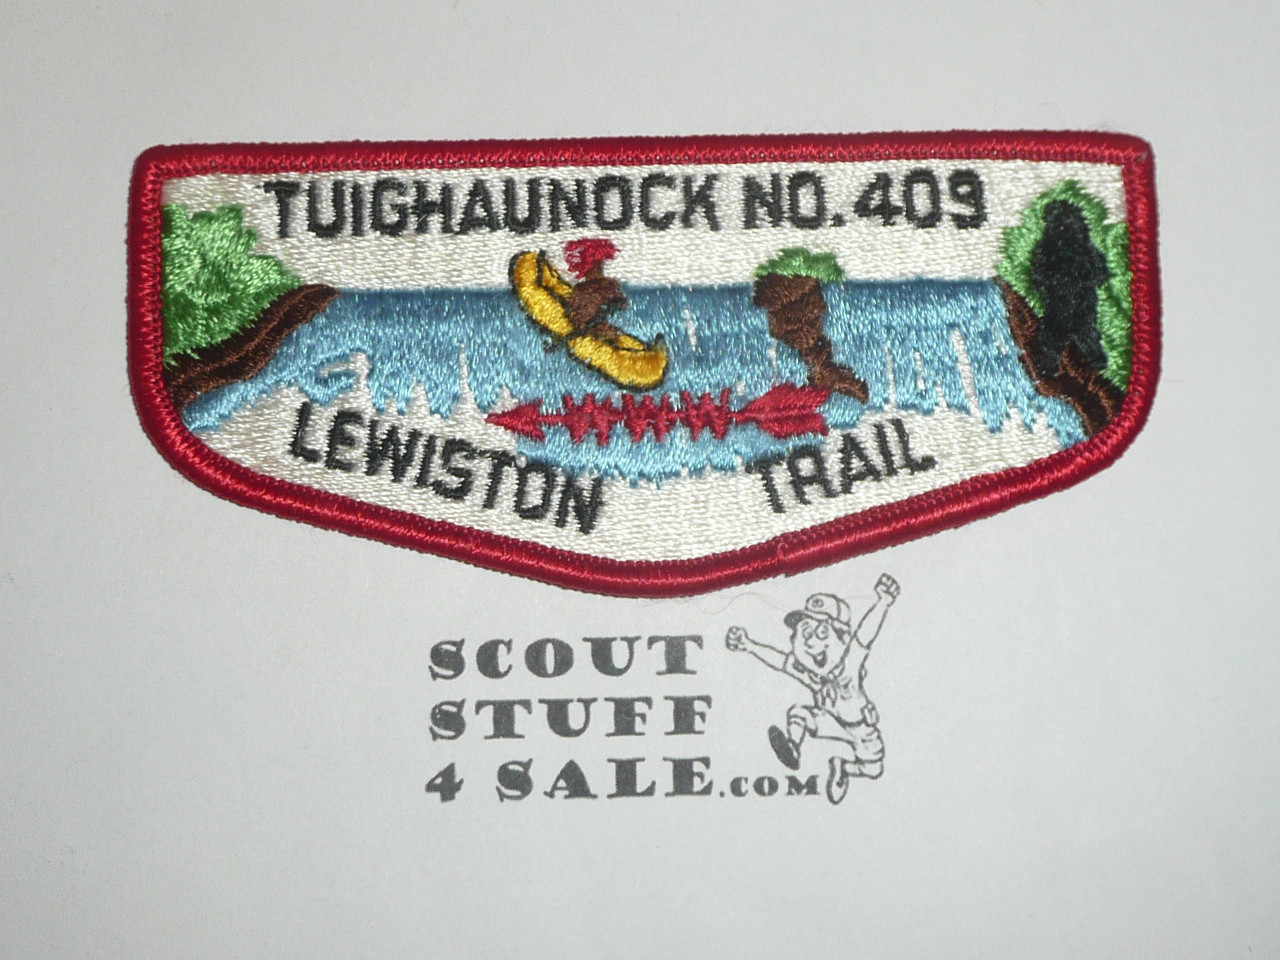 Order of the Arrow Lodge #409 Tuighaunock s7 Flap Patch